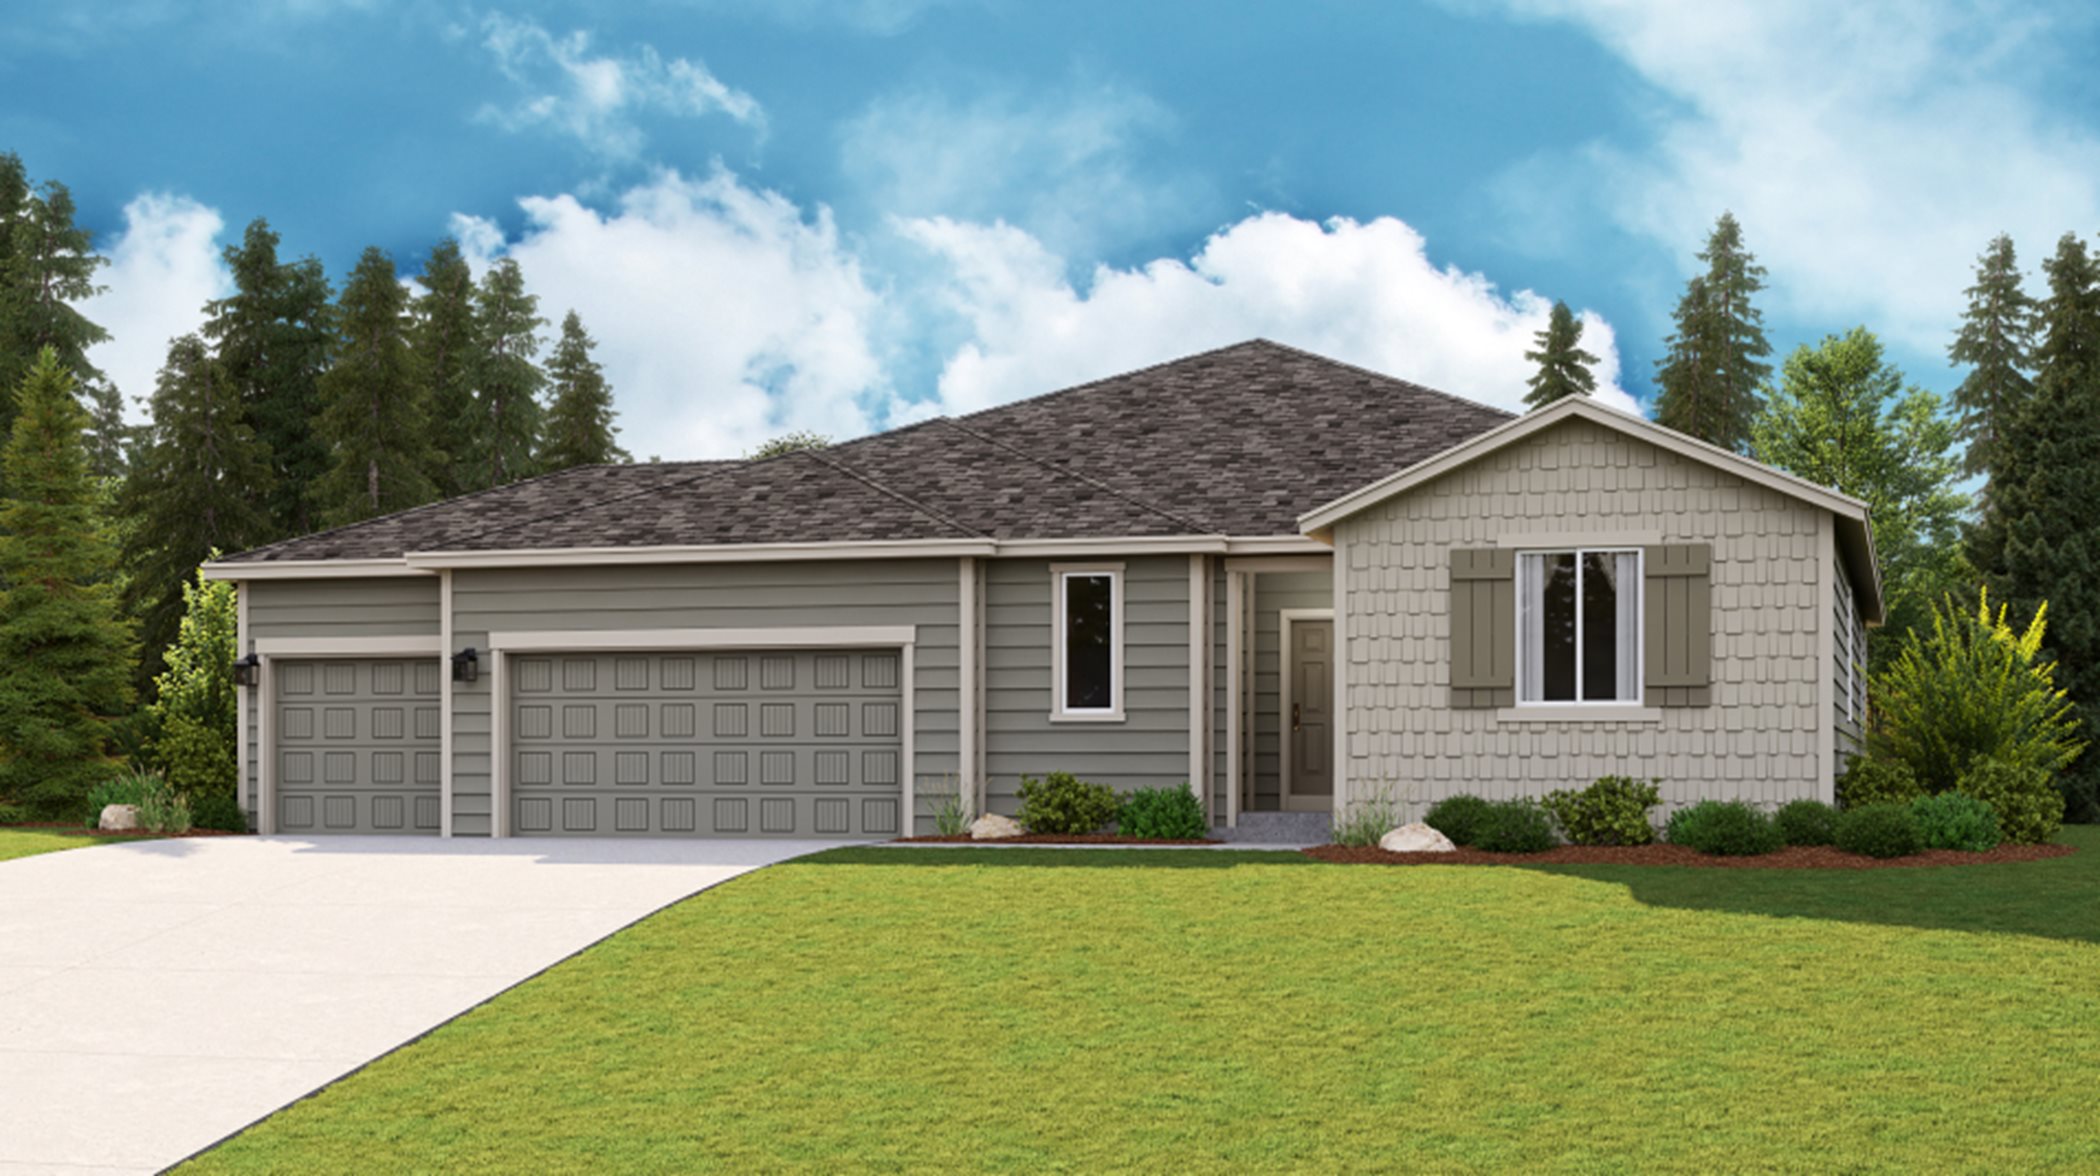 Elevation A home rendering